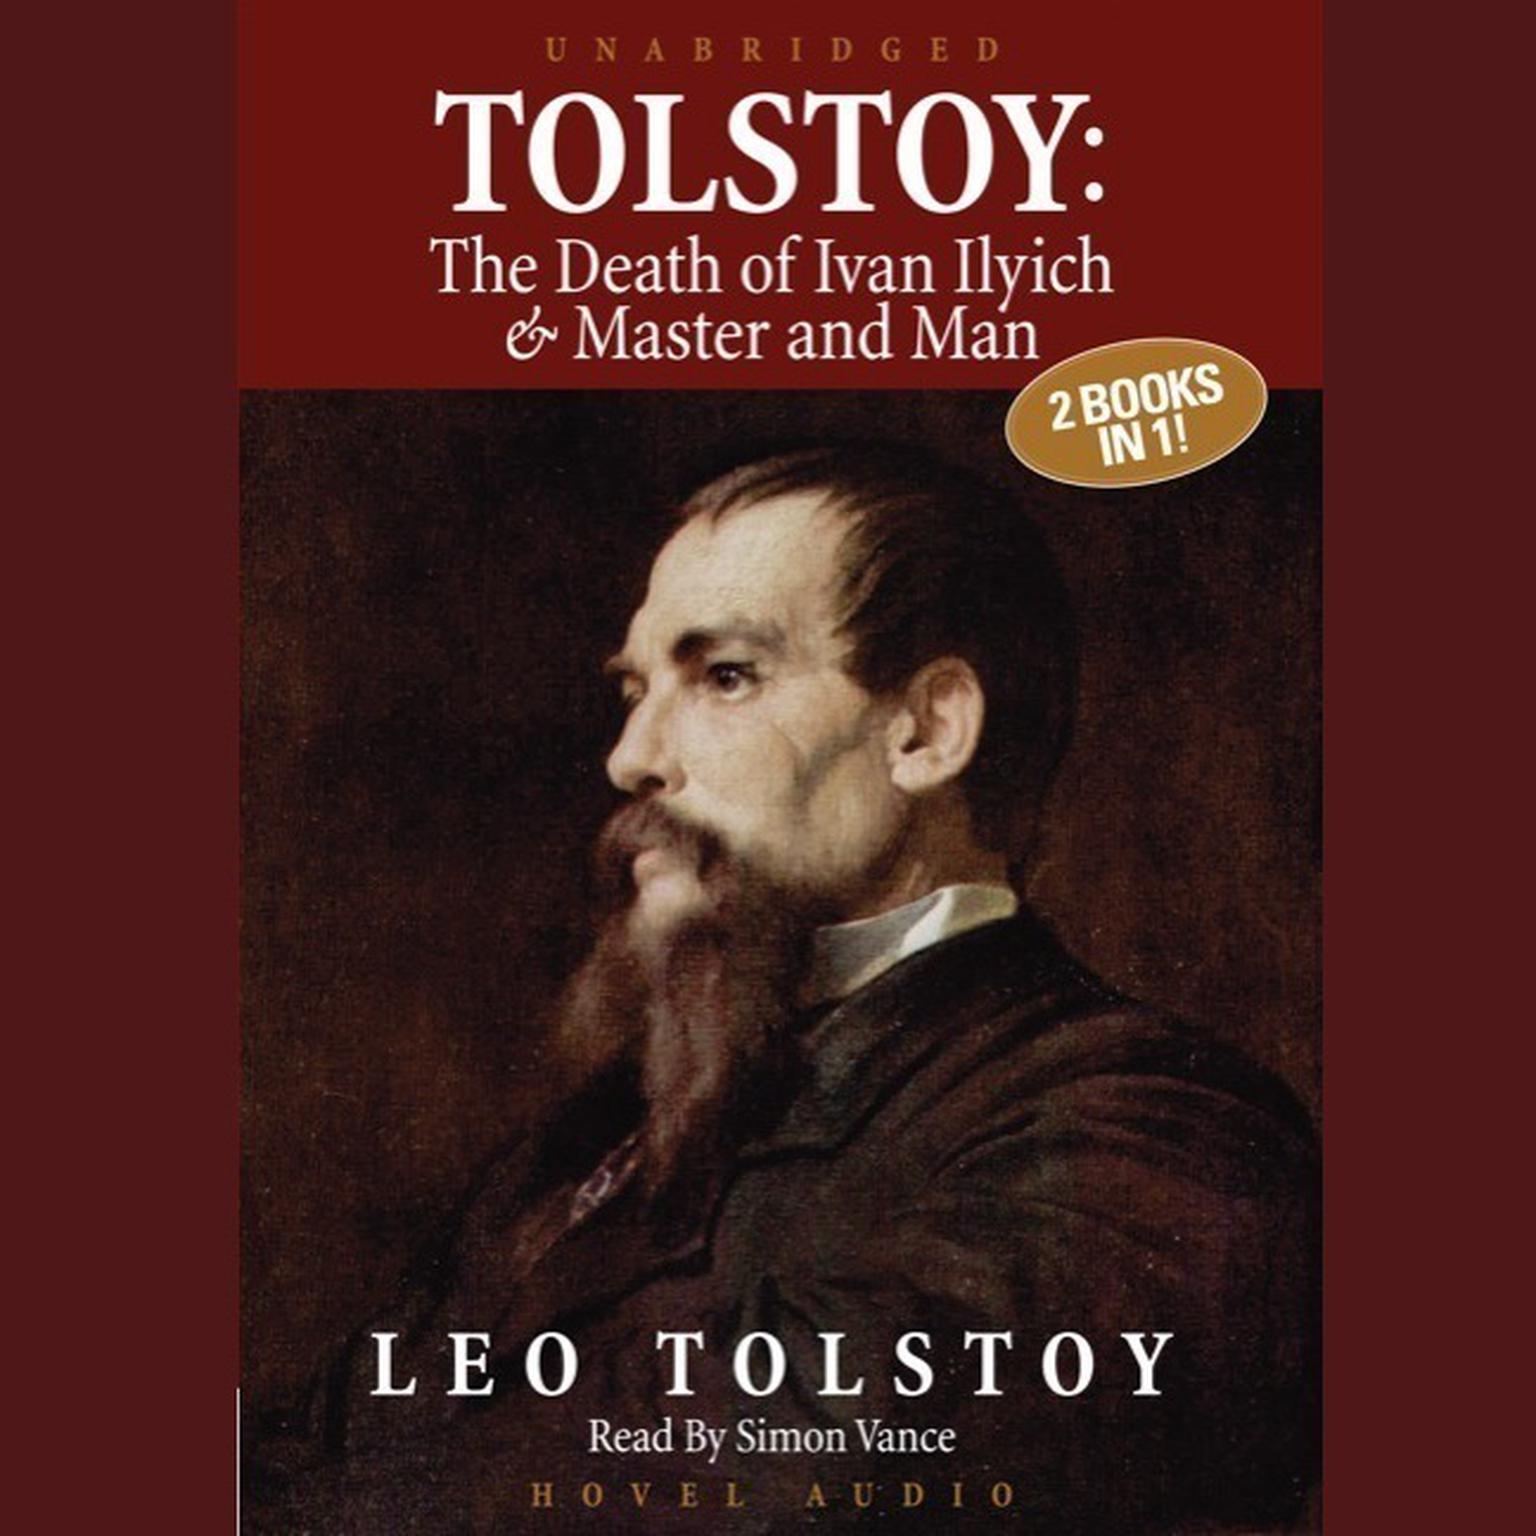 Tolstoy: The Death of Ivan Ilyich & Master and Man Audiobook, by Leo Tolstoy